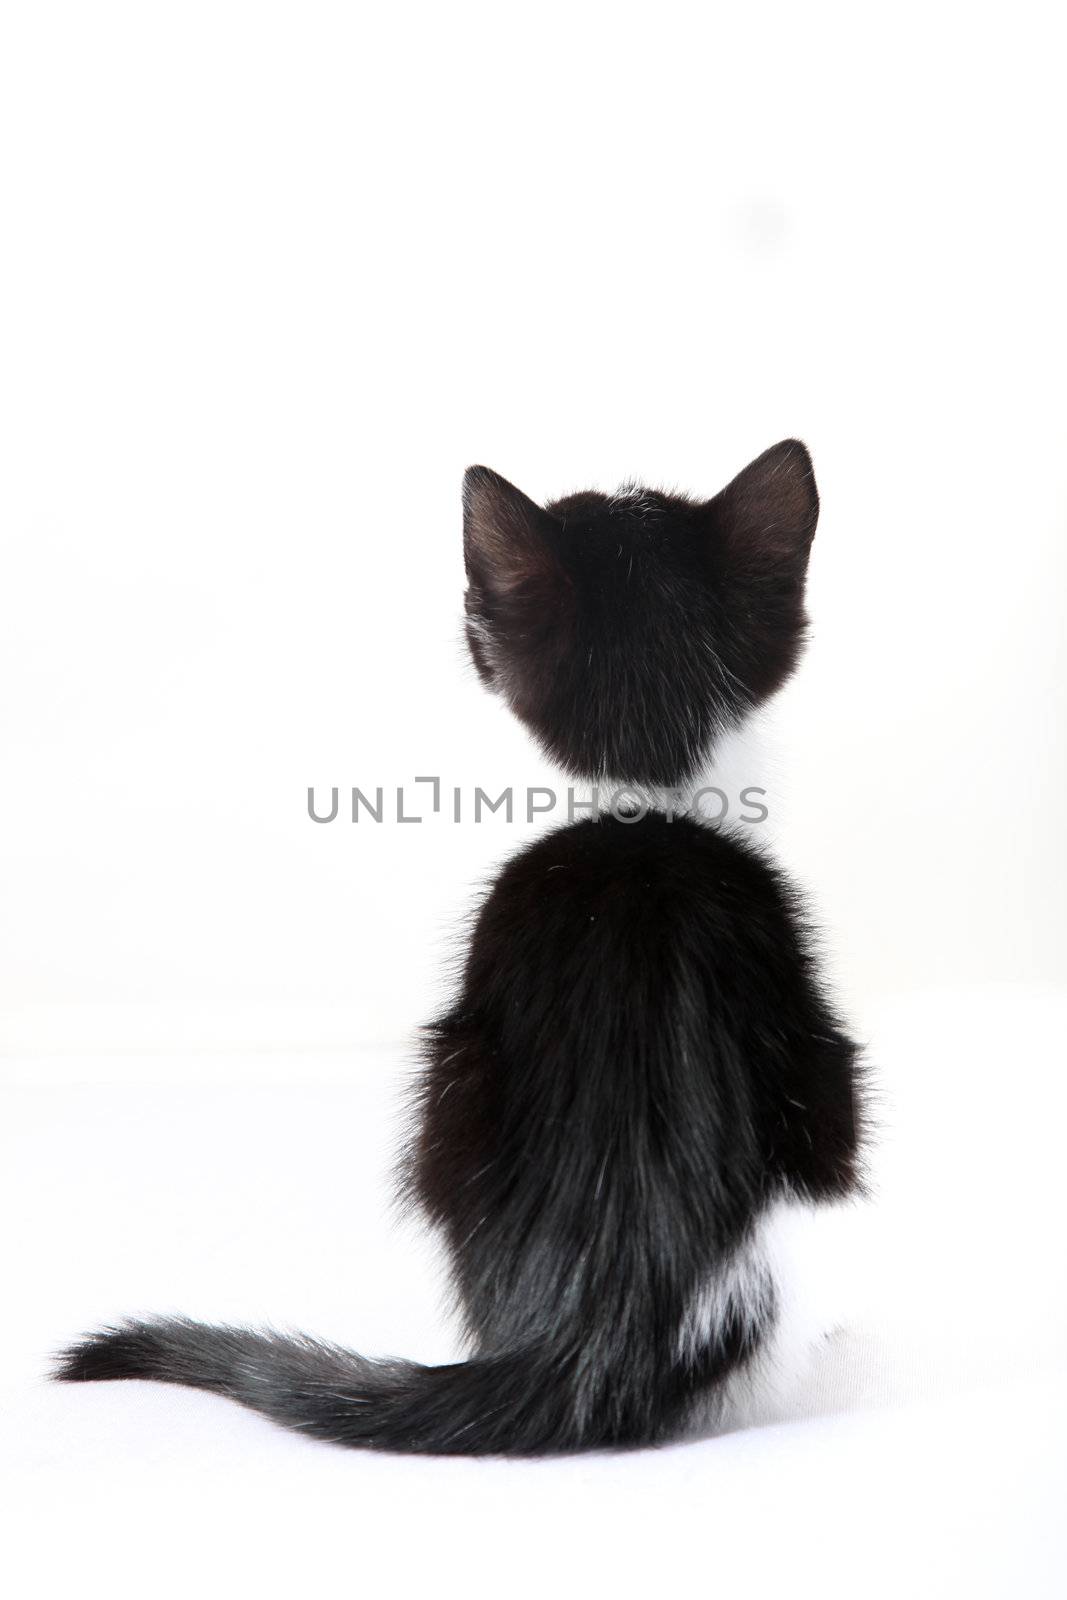 kitten from behind against a white background by Farina6000